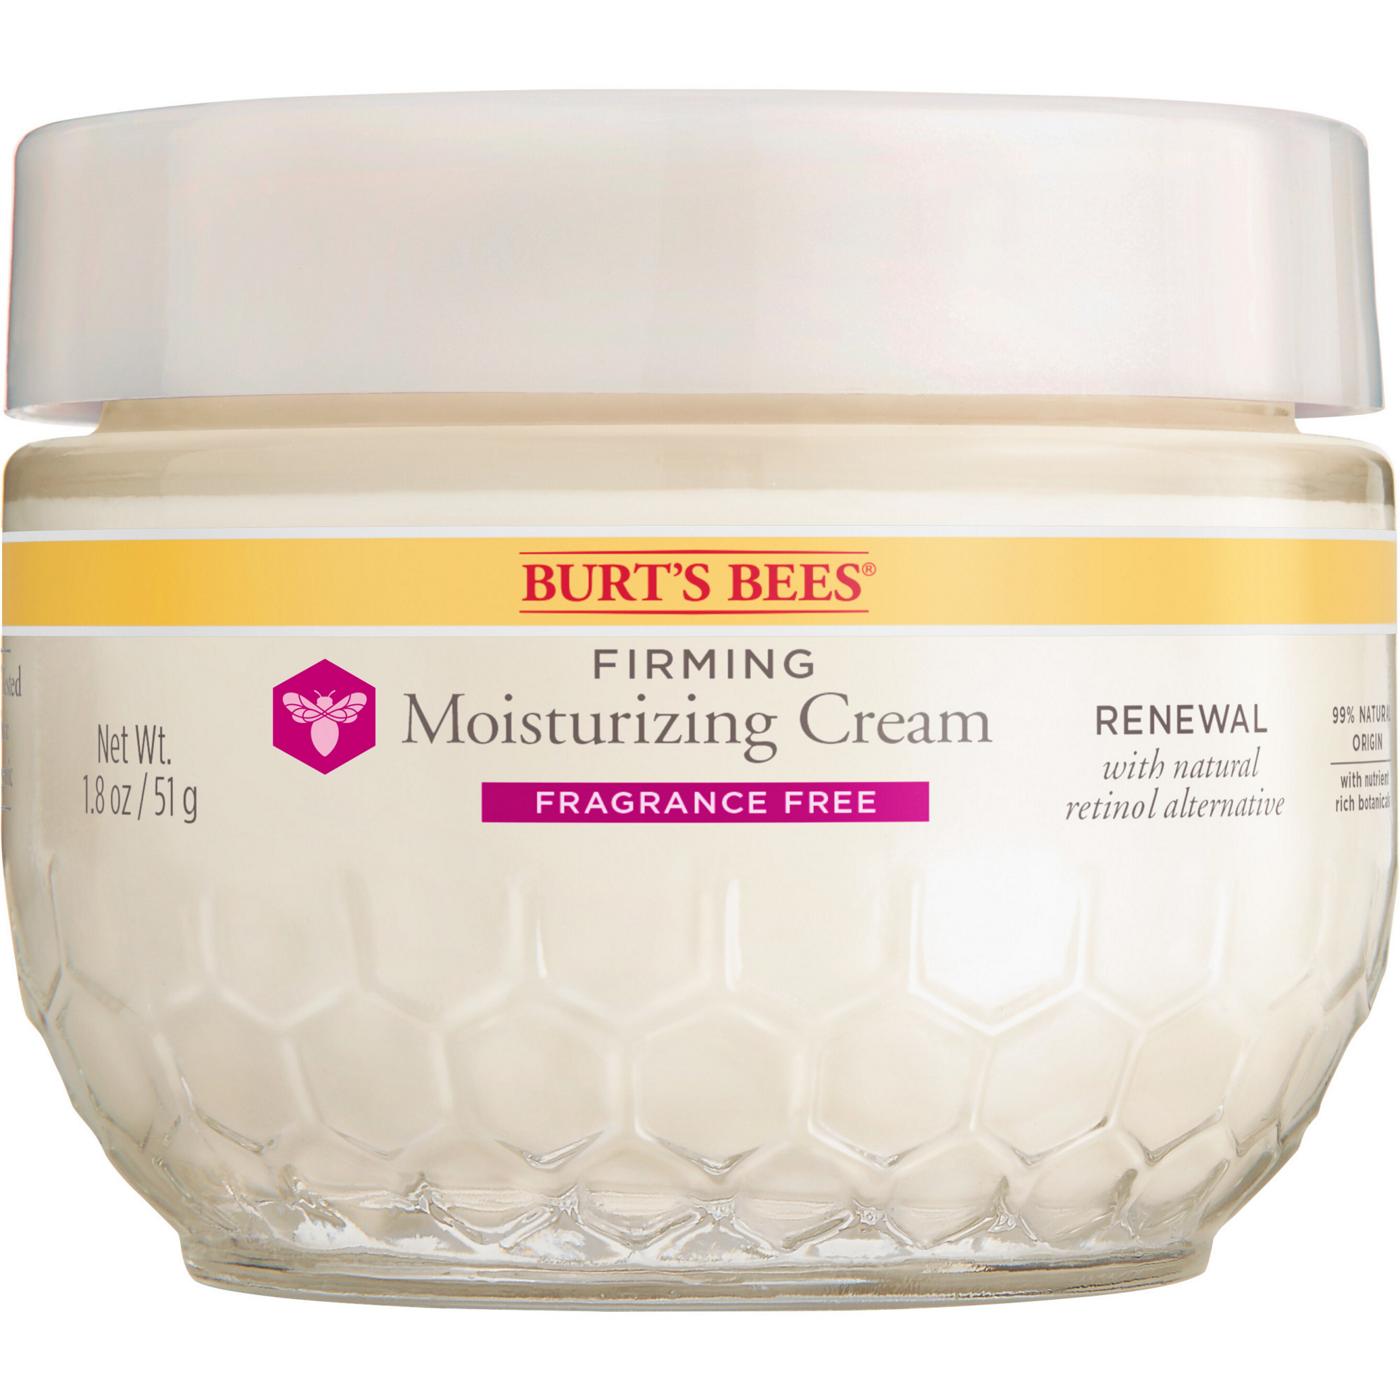 Burt's Bees Renewal Firming and Moisturizing Cream - Fragrance Free; image 1 of 13